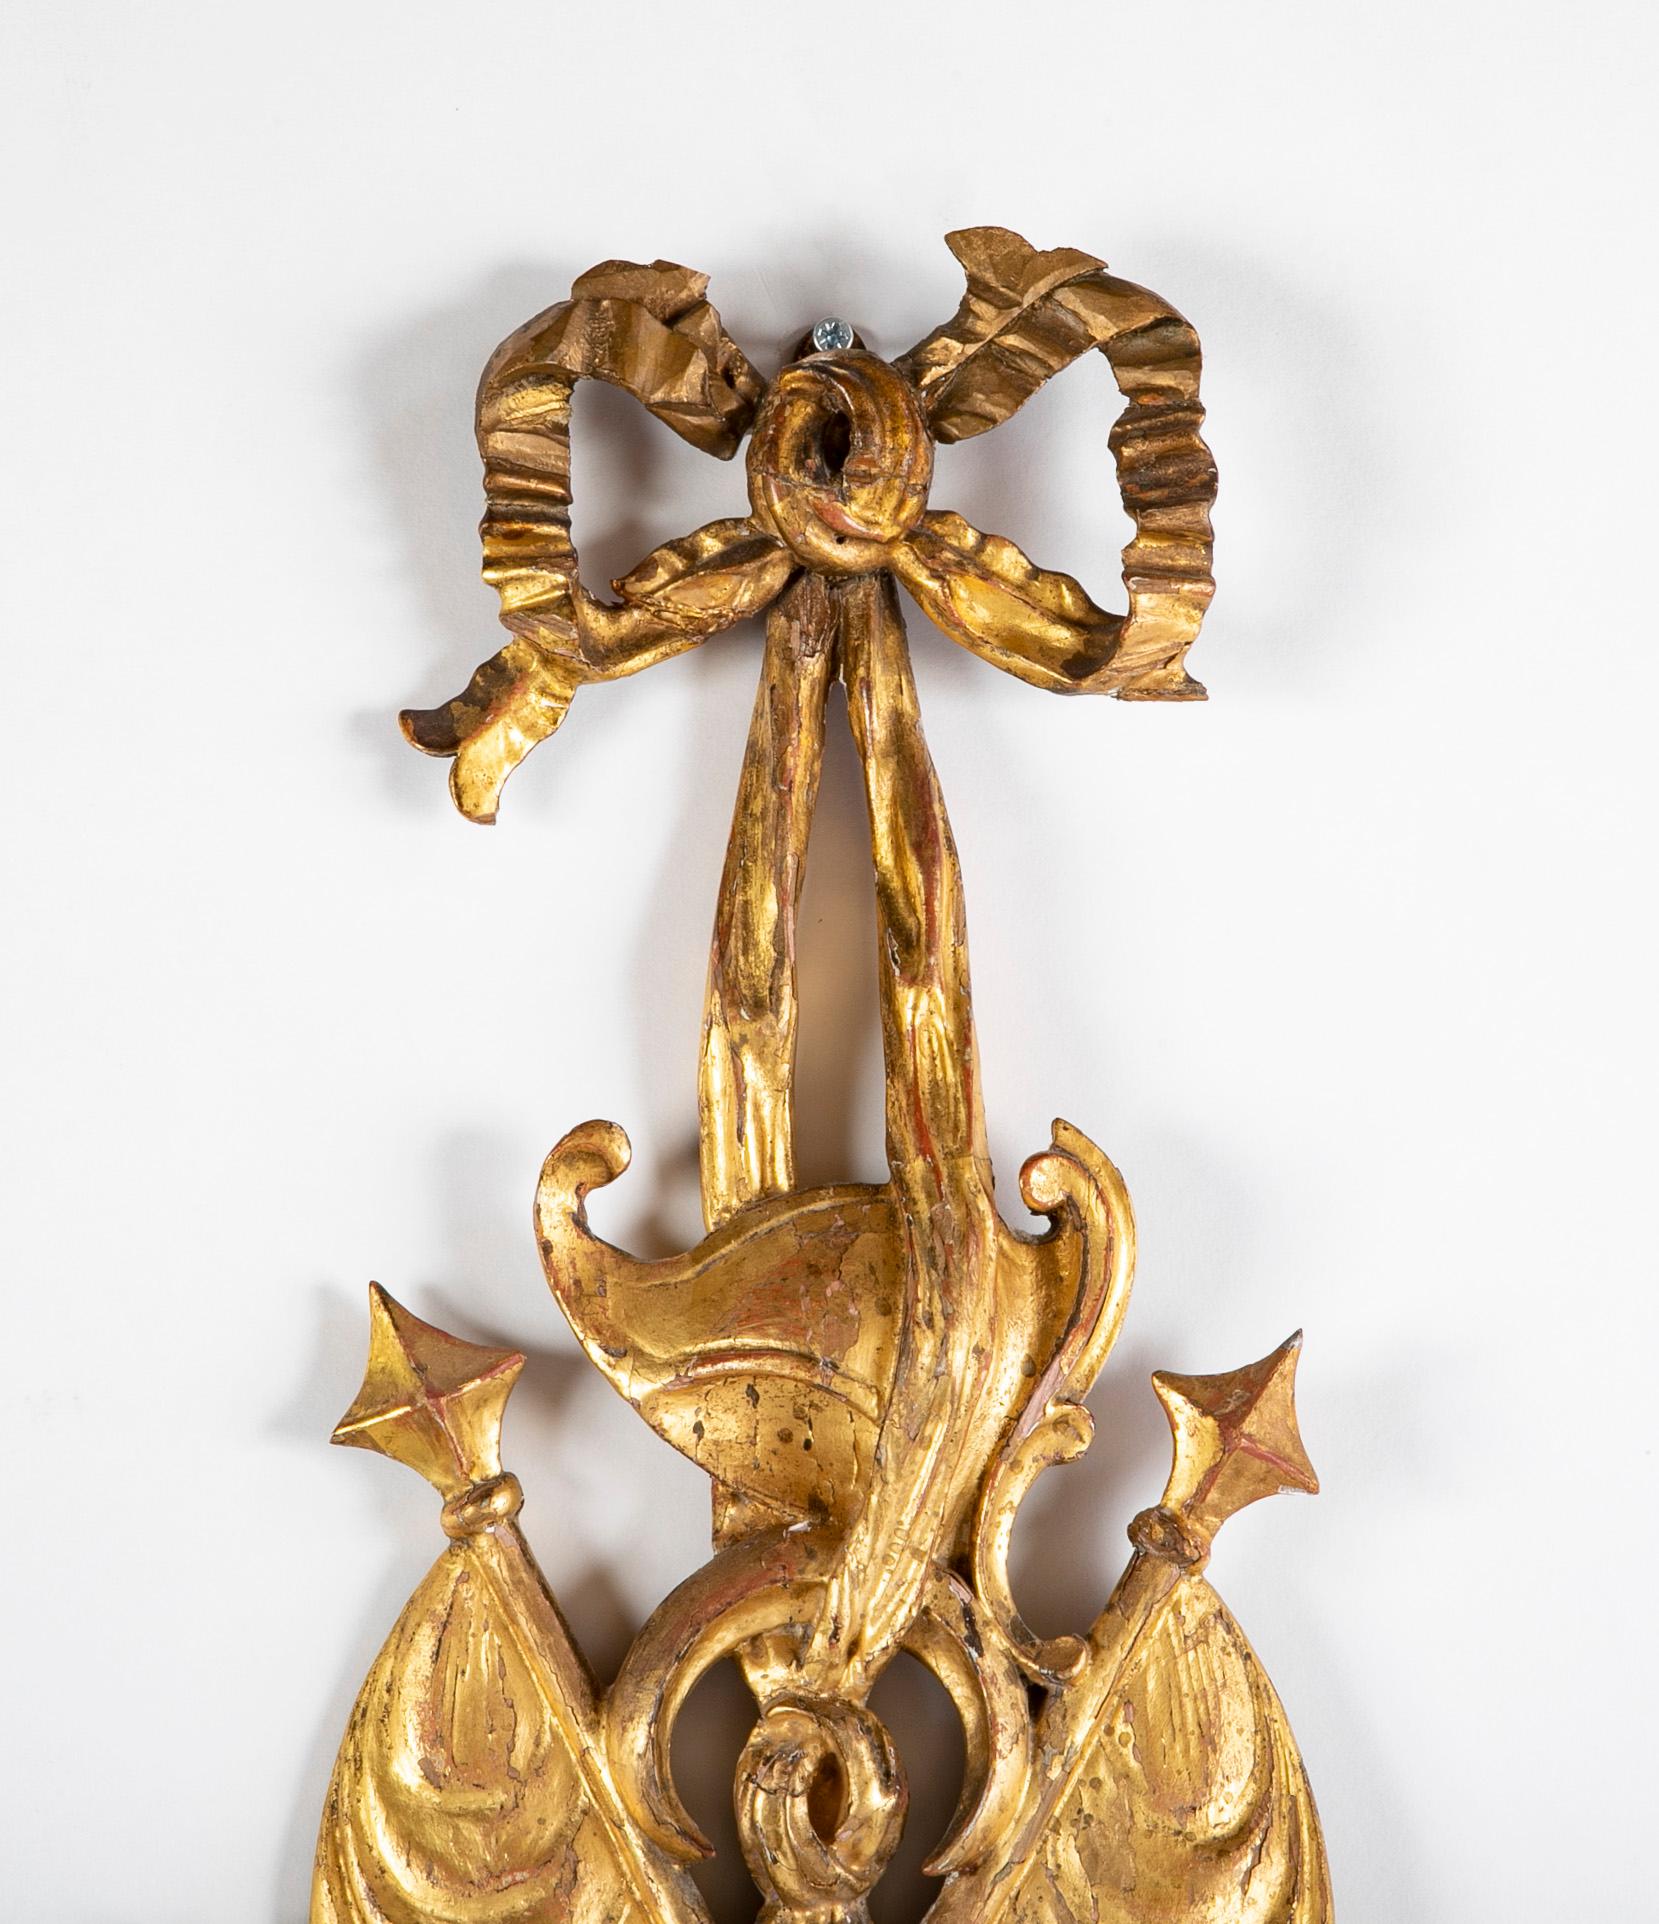 19th Century Pair of Italian Giltwood Wall Sconces in Neoclassical Trophy Form For Sale